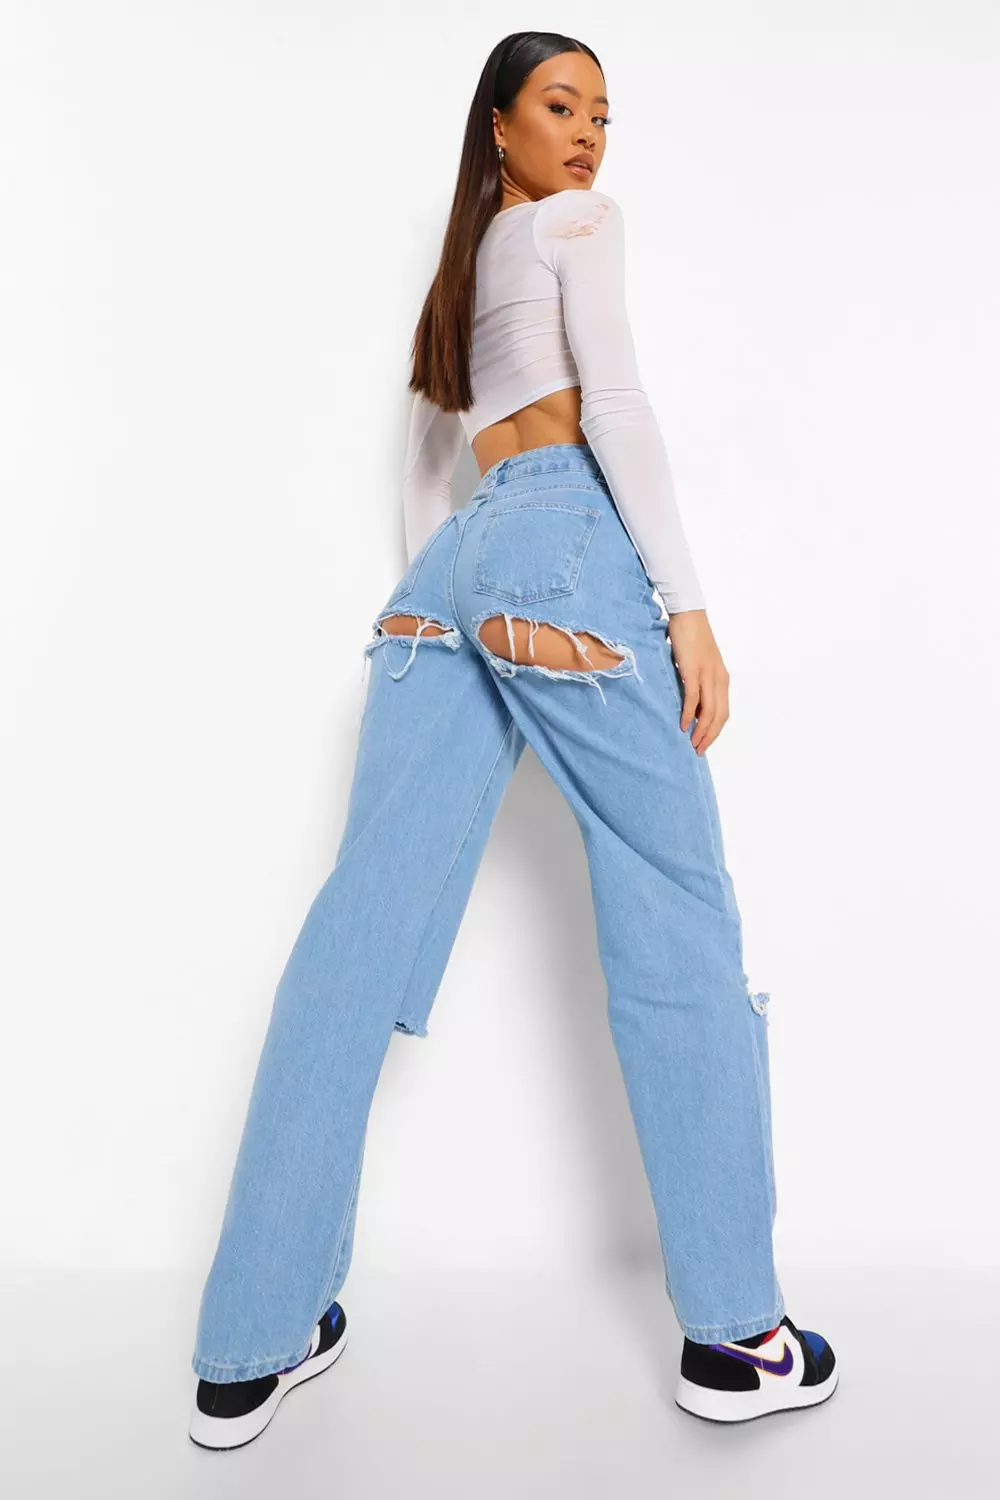 Loose-fit jeans with tears